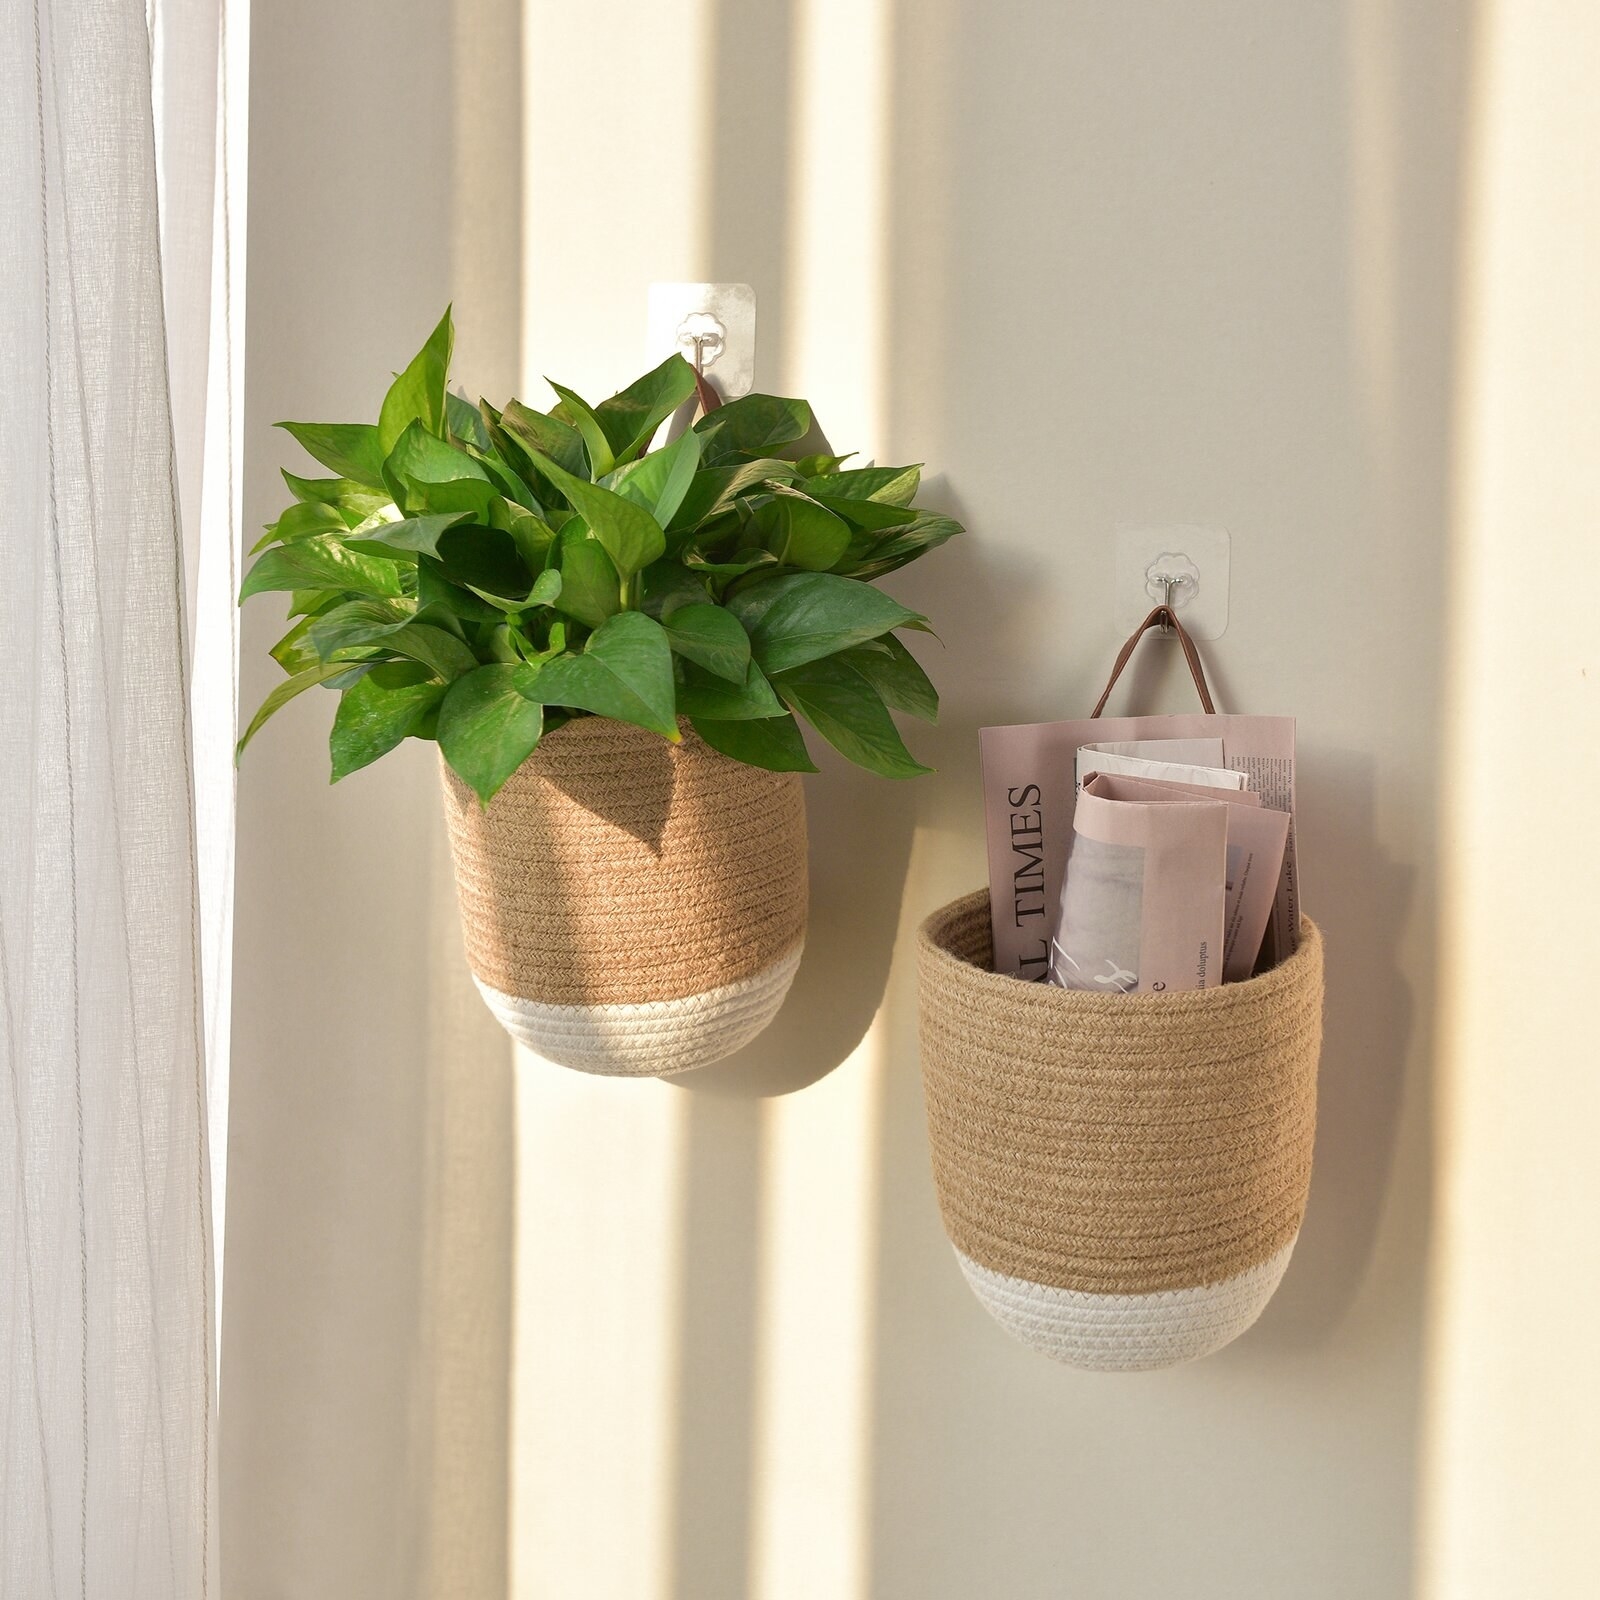 two jute baskets hanging on two hooks, one filled with newspapers and the other with a healthy Pothos plant. Each basket is a natural color with a white bottom